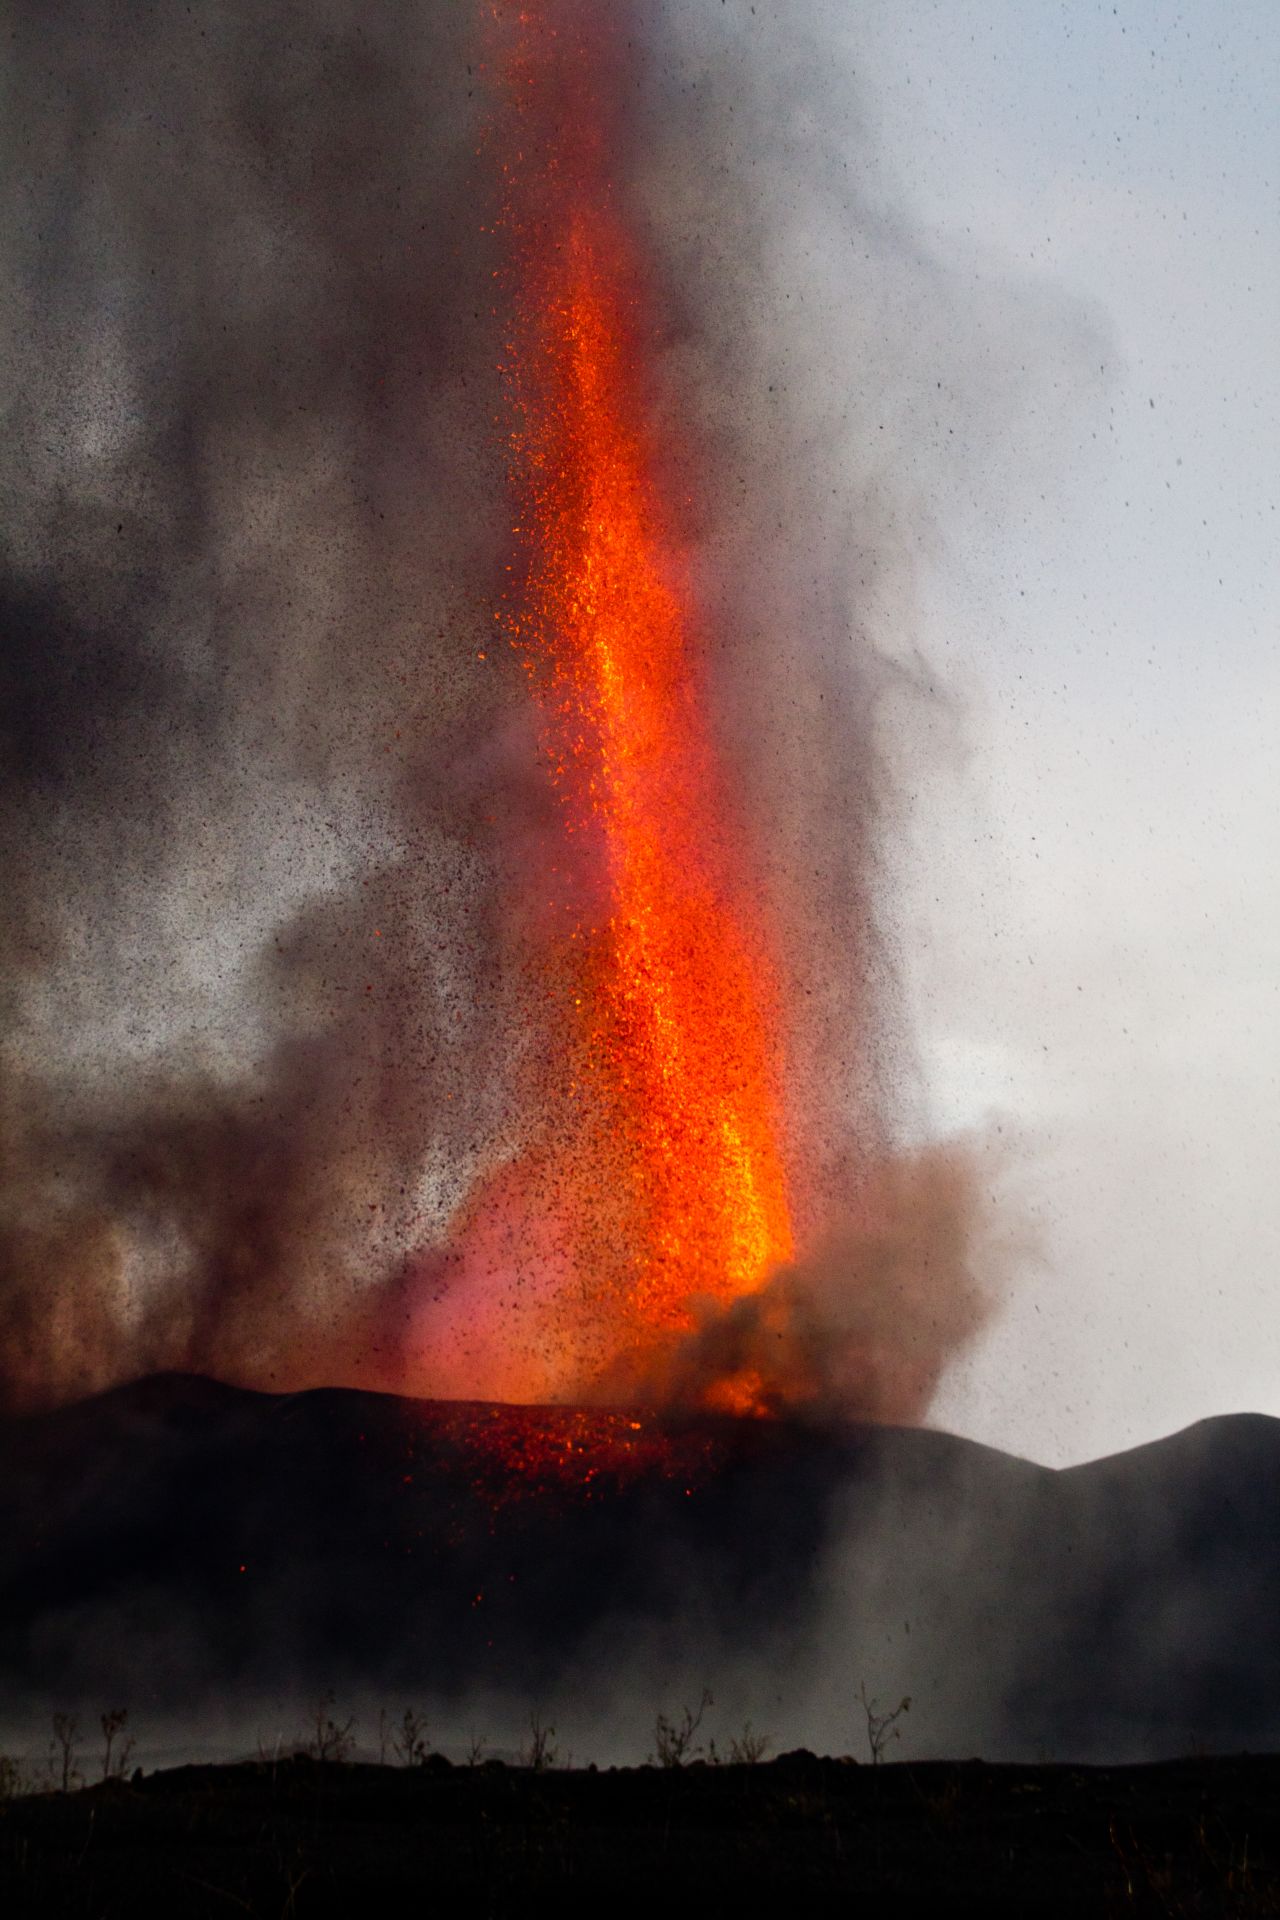 Mount Nyamulagira is considered to be the most active volcano and is currently ejecting lava fountains as high as 300 meters in the air. The incandescent lava is currently flowing into uninhabited areas in the south of the park.